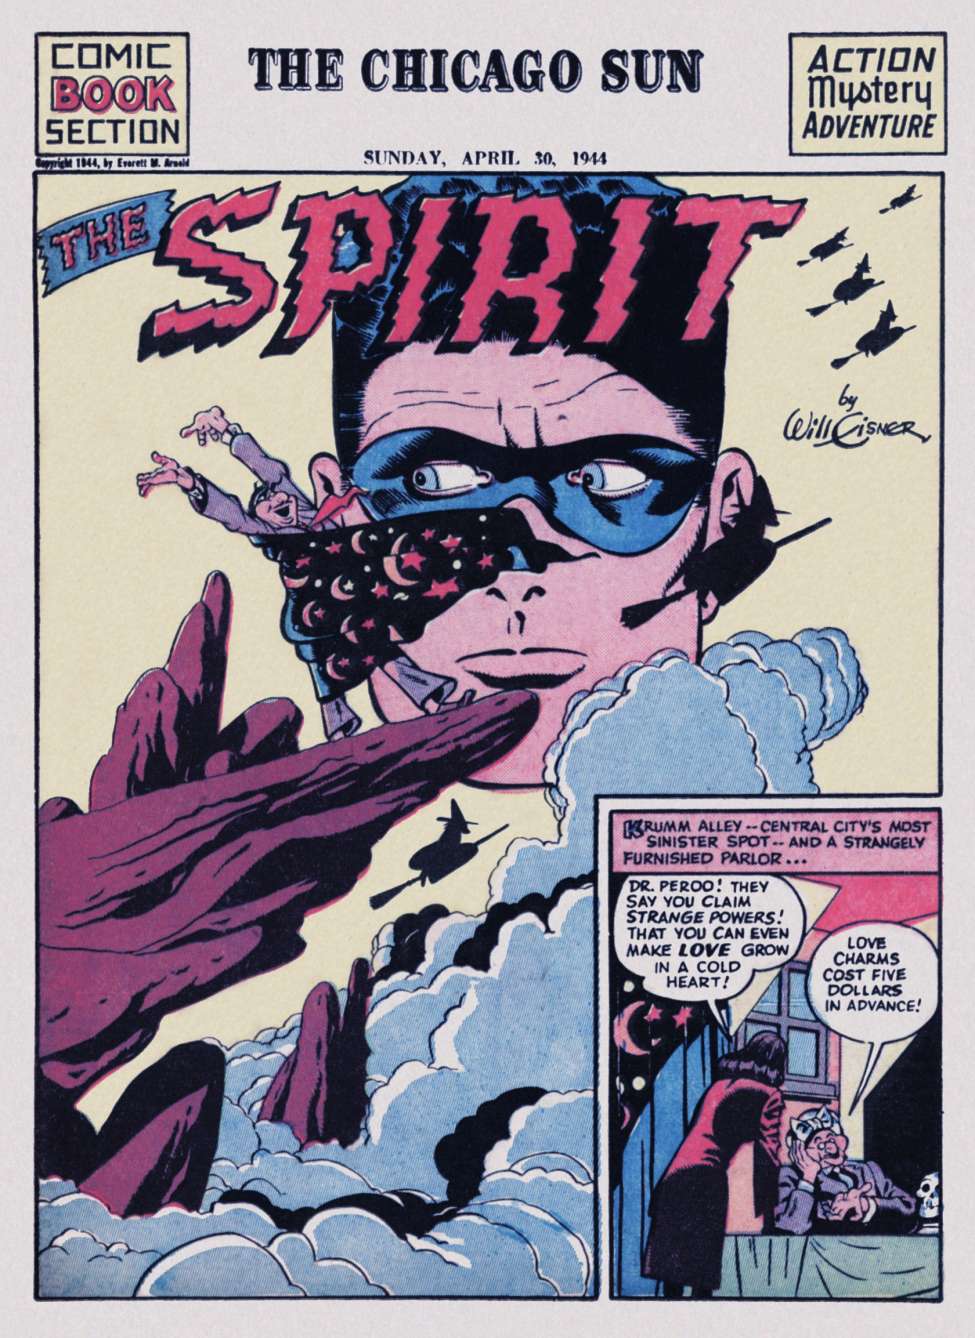 Comic Book Cover For The Spirit (1944-04-30) - Chicago Sun